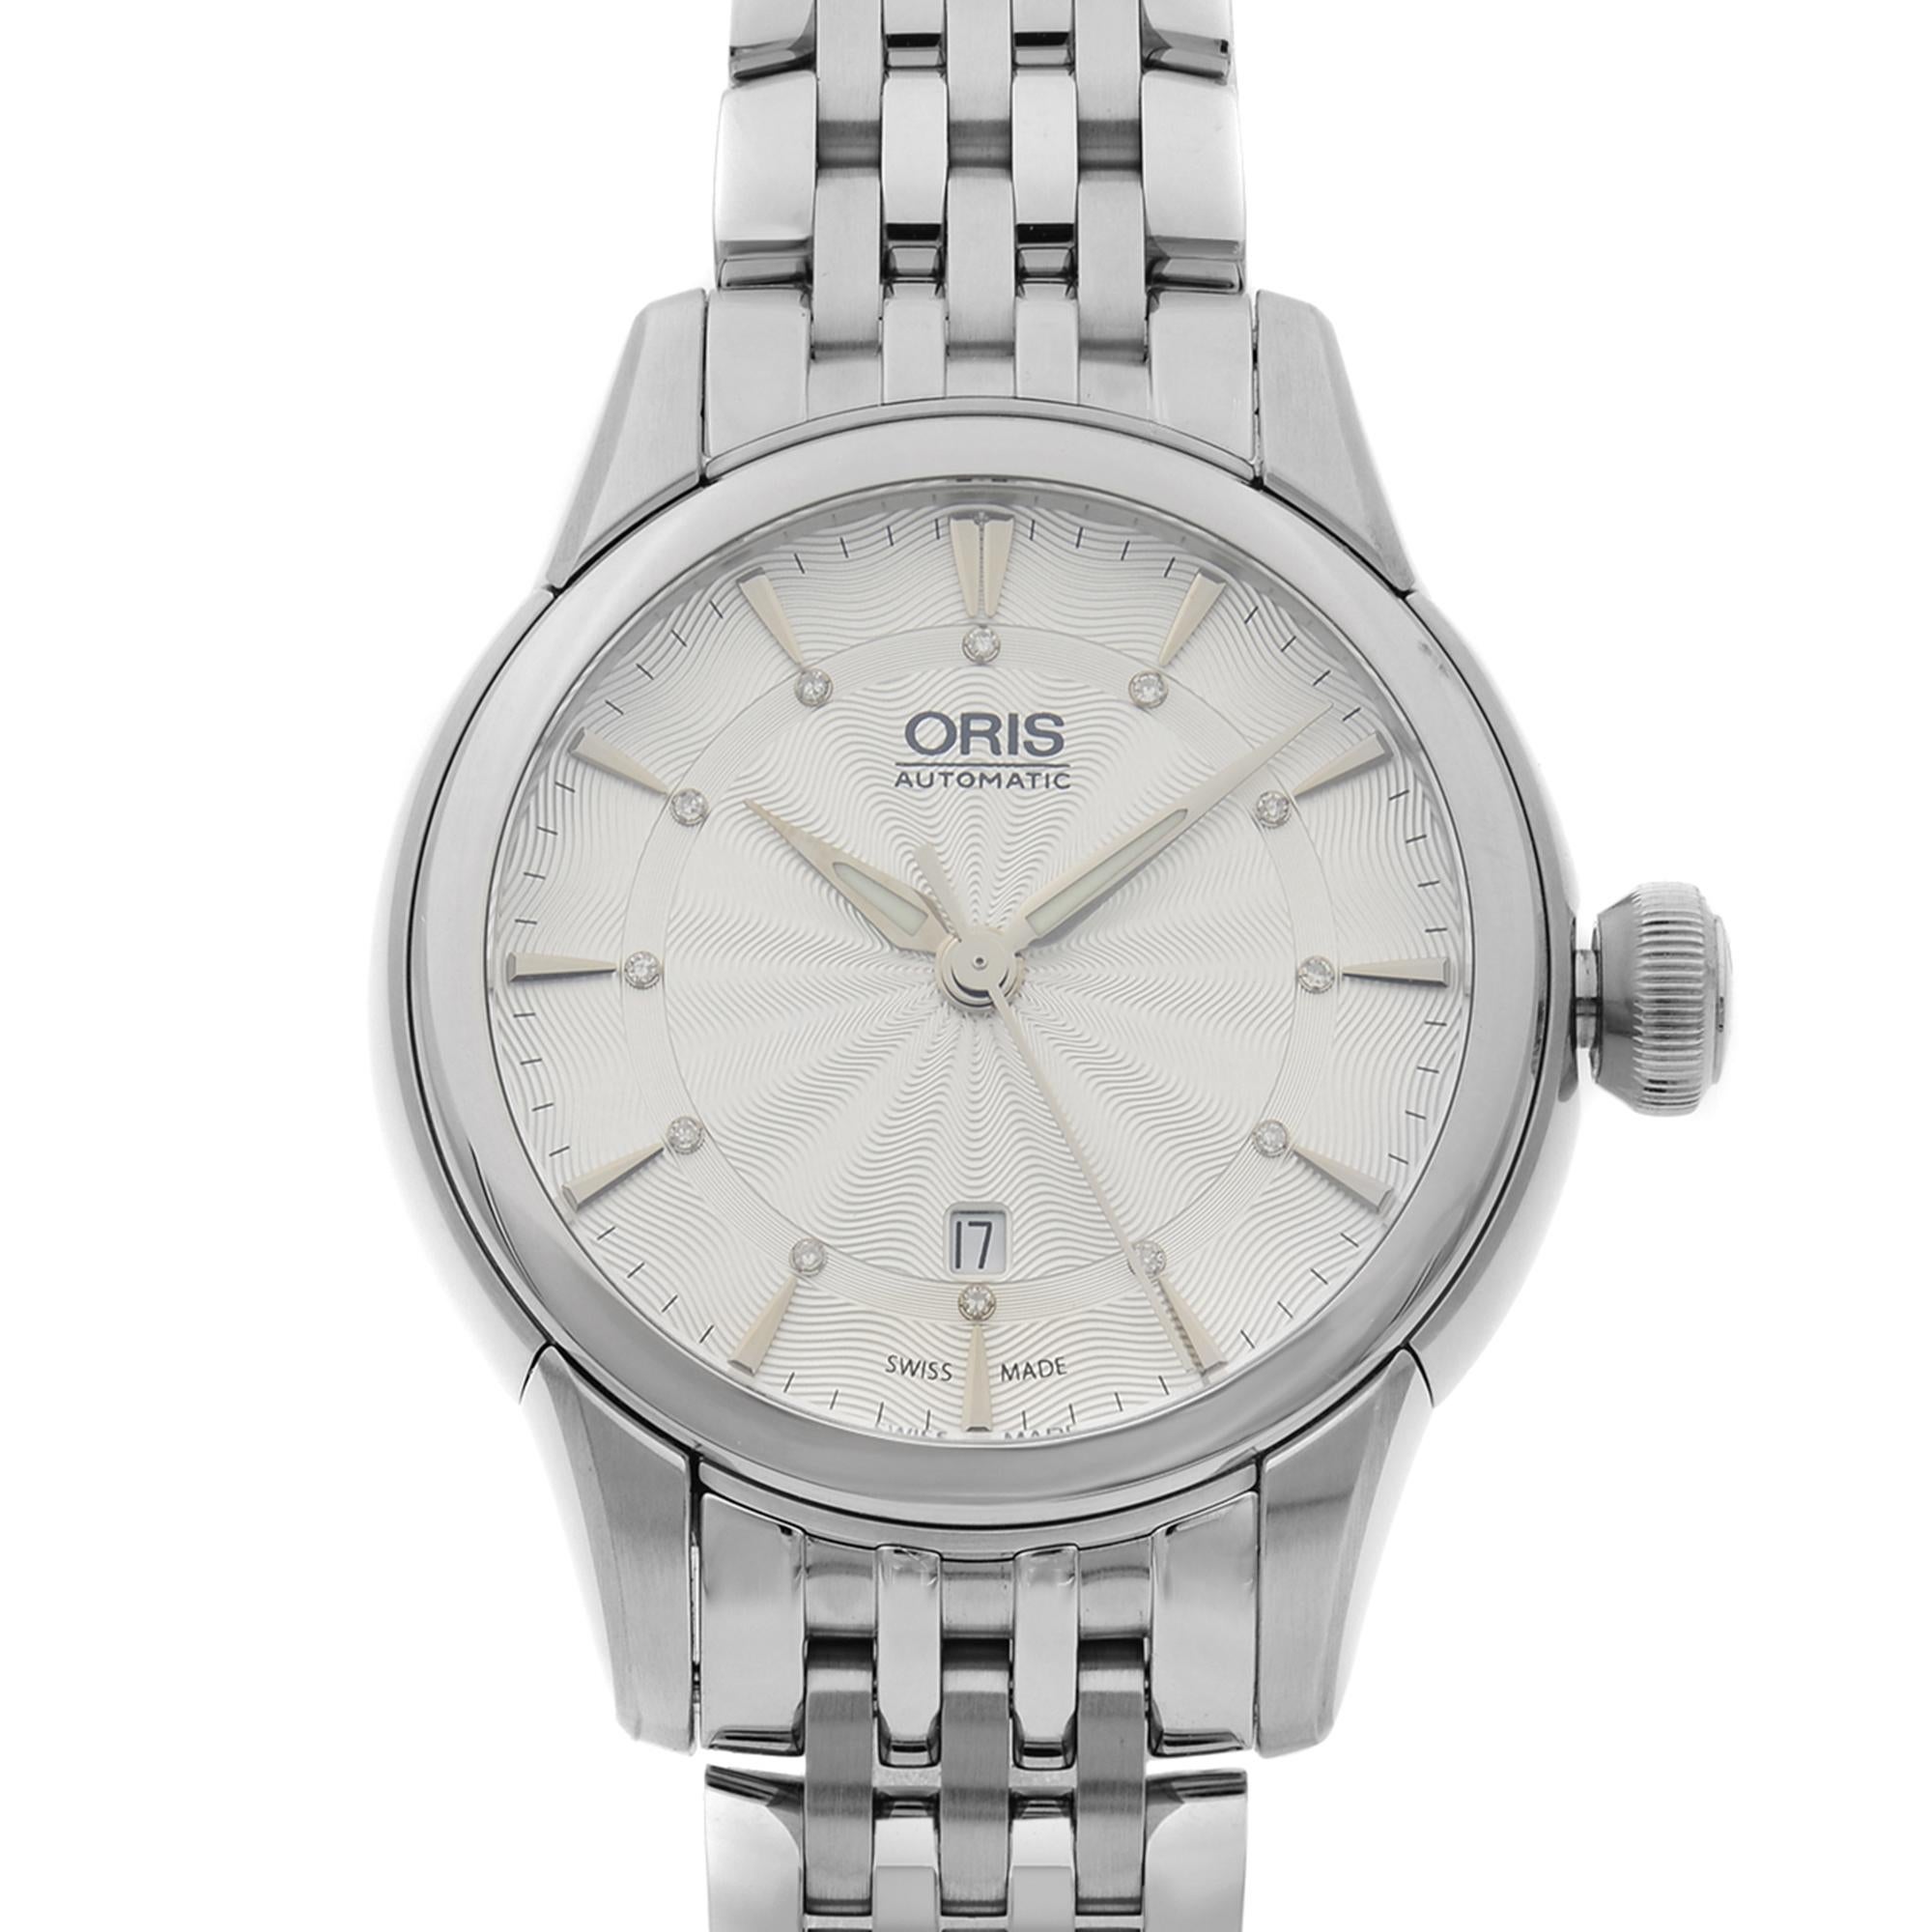 This display model Oris Artelier  01 561 7687 4051-07 8 14 77 is a beautiful Ladie's timepiece that is powered by mechanical (automatic) movement which is cased in a stainless steel case. It has a round shape face, date indicator dial and has hand